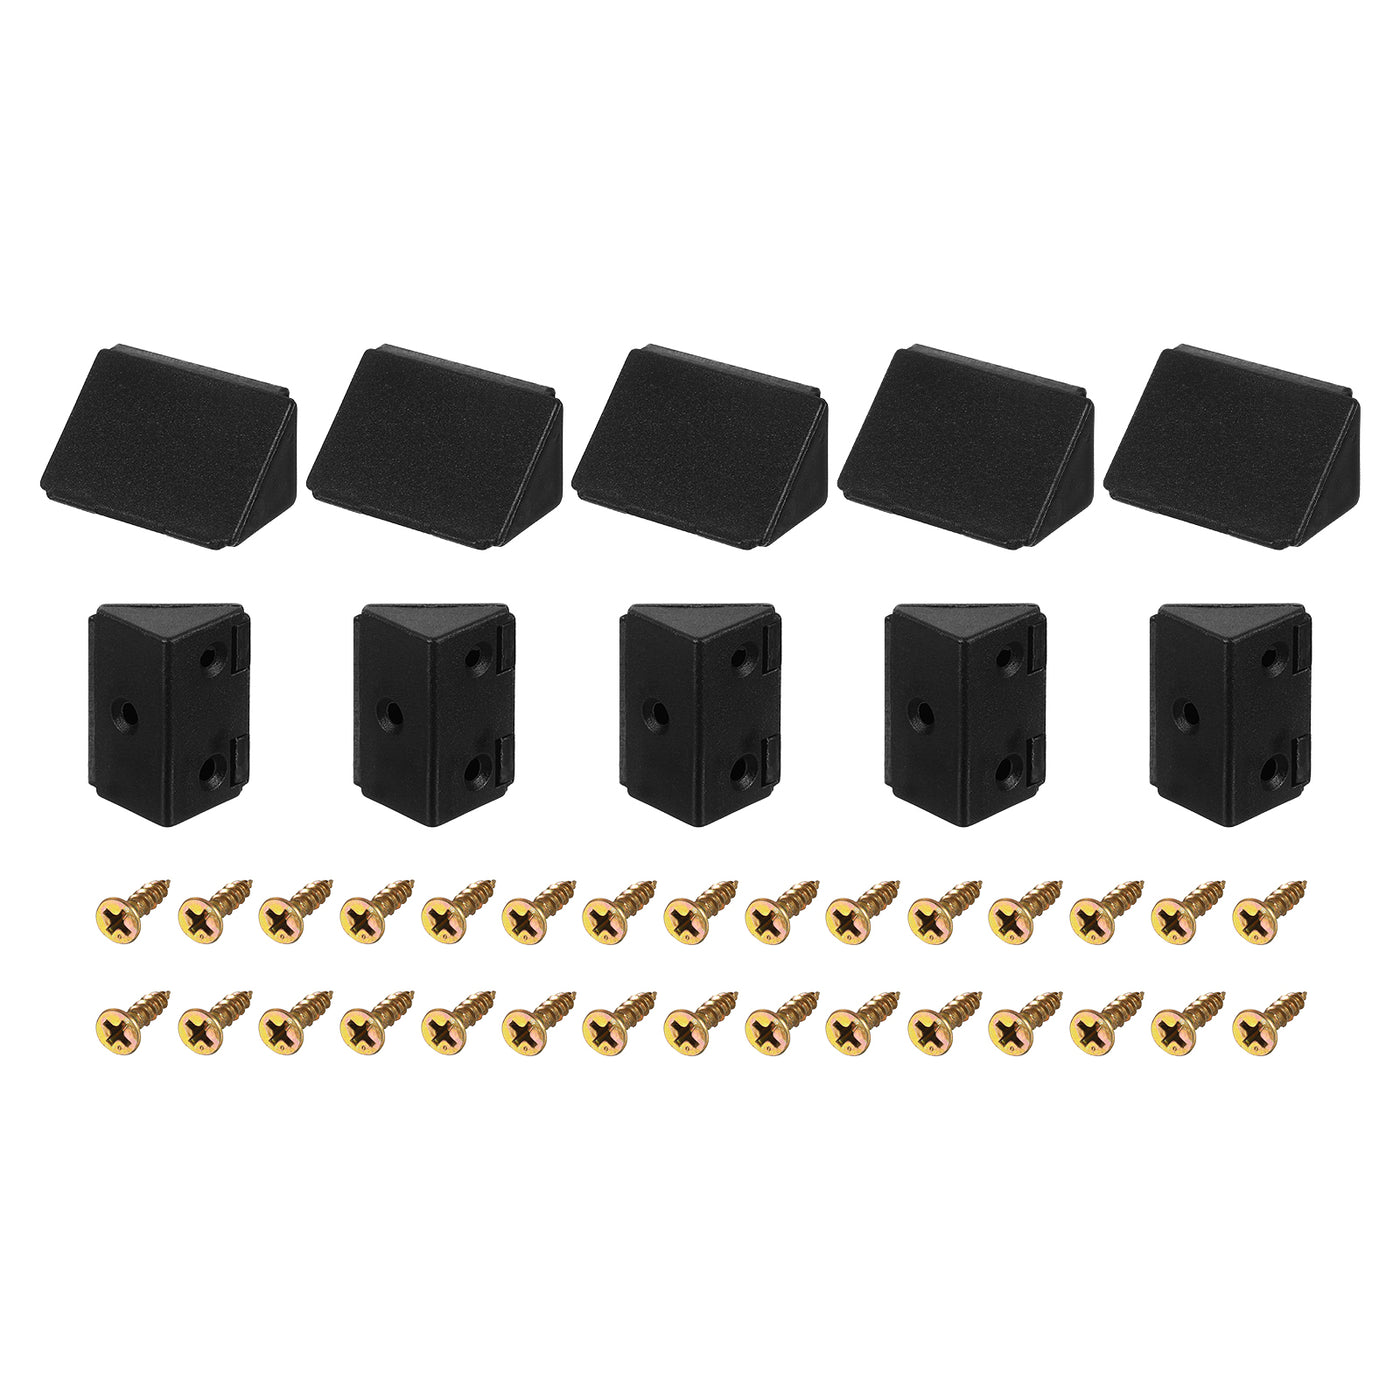 uxcell Uxcell 10Pcs 90 Degree Plastic Corner Braces with Cover Cap, 43x23x23mm Nylon Shelf Right Angle Brackets with Screws for Cabinets, Cupboards (Black)